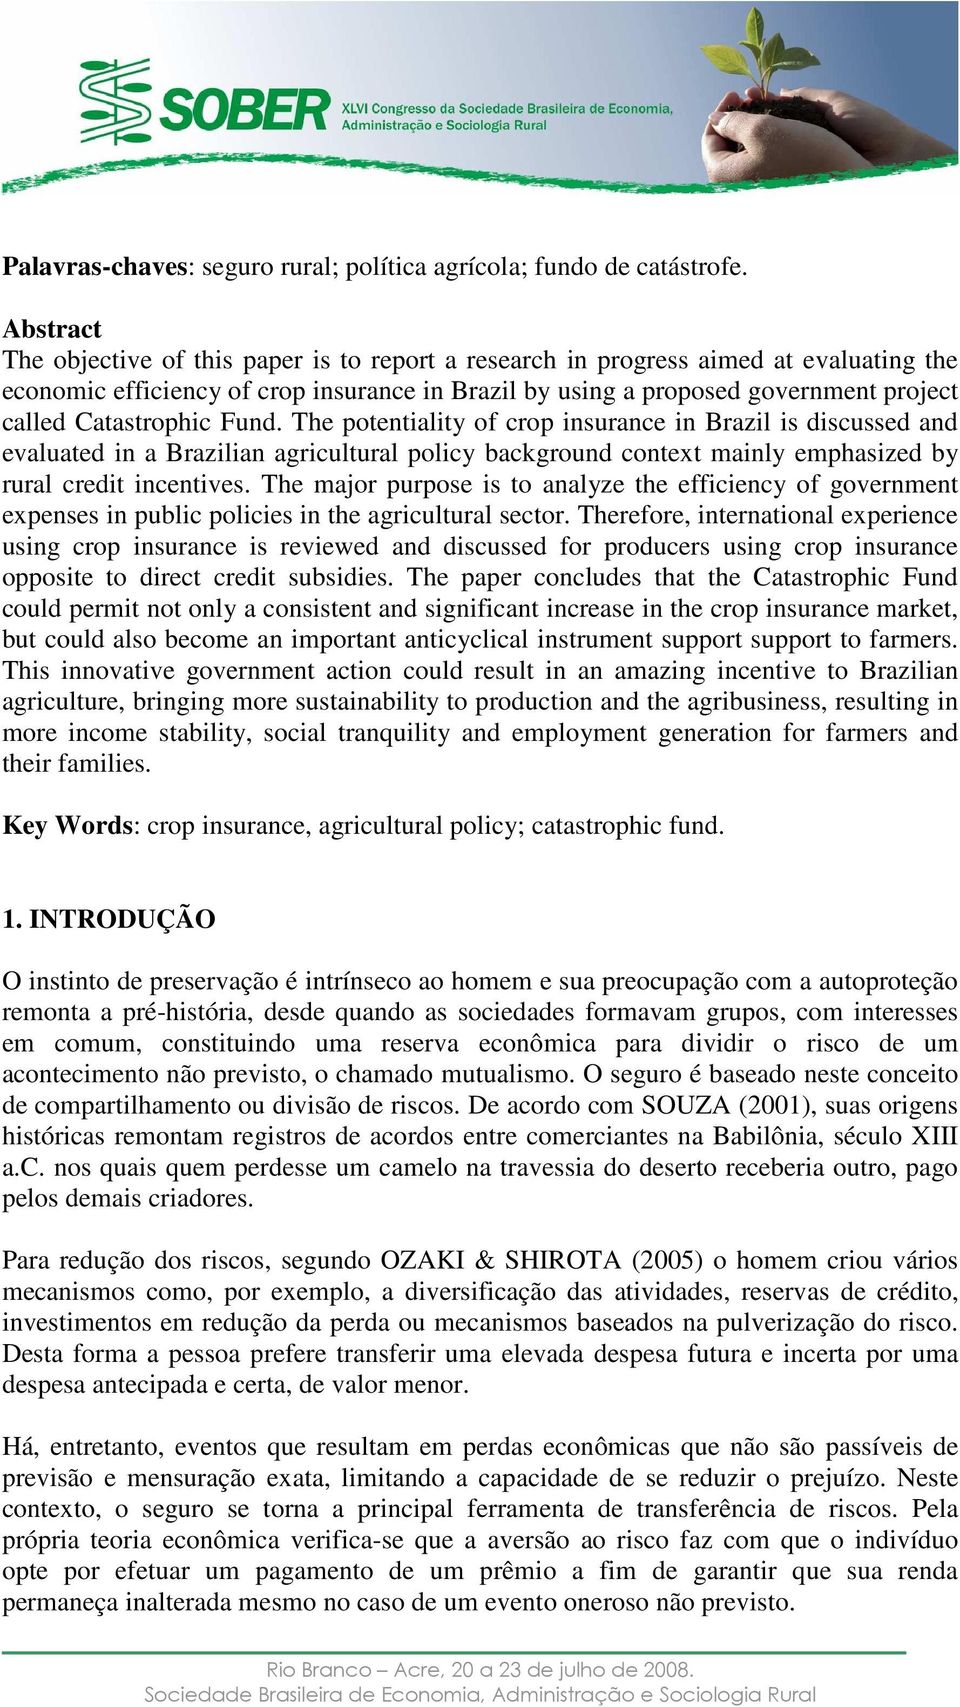 Catastrophic Fund. The potentiality of crop insurance in Brazil is discussed and evaluated in a Brazilian agricultural policy background context mainly emphasized by rural credit incentives.